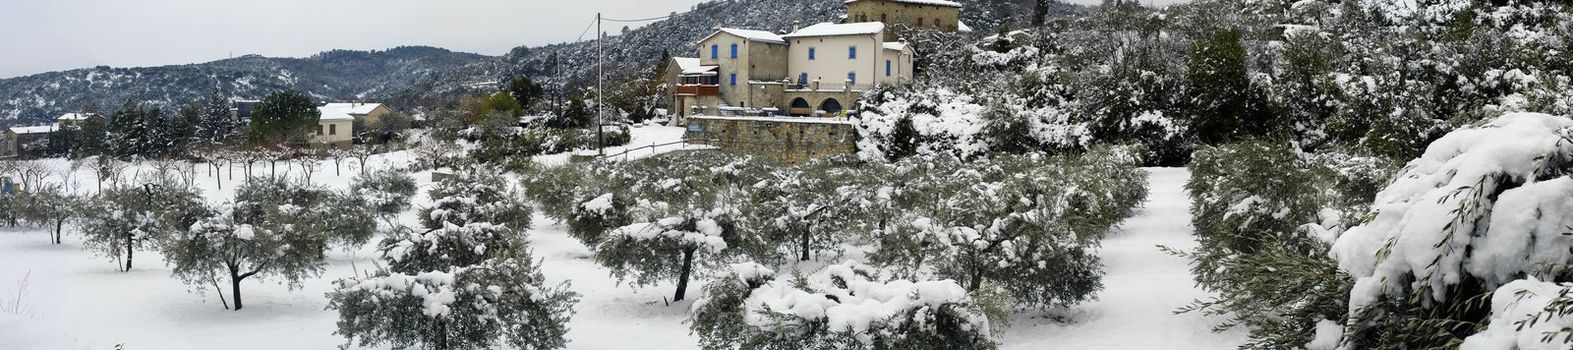 Landscape of Gard under snow. Gard is a department of the South-east of France located in the Cevennes.